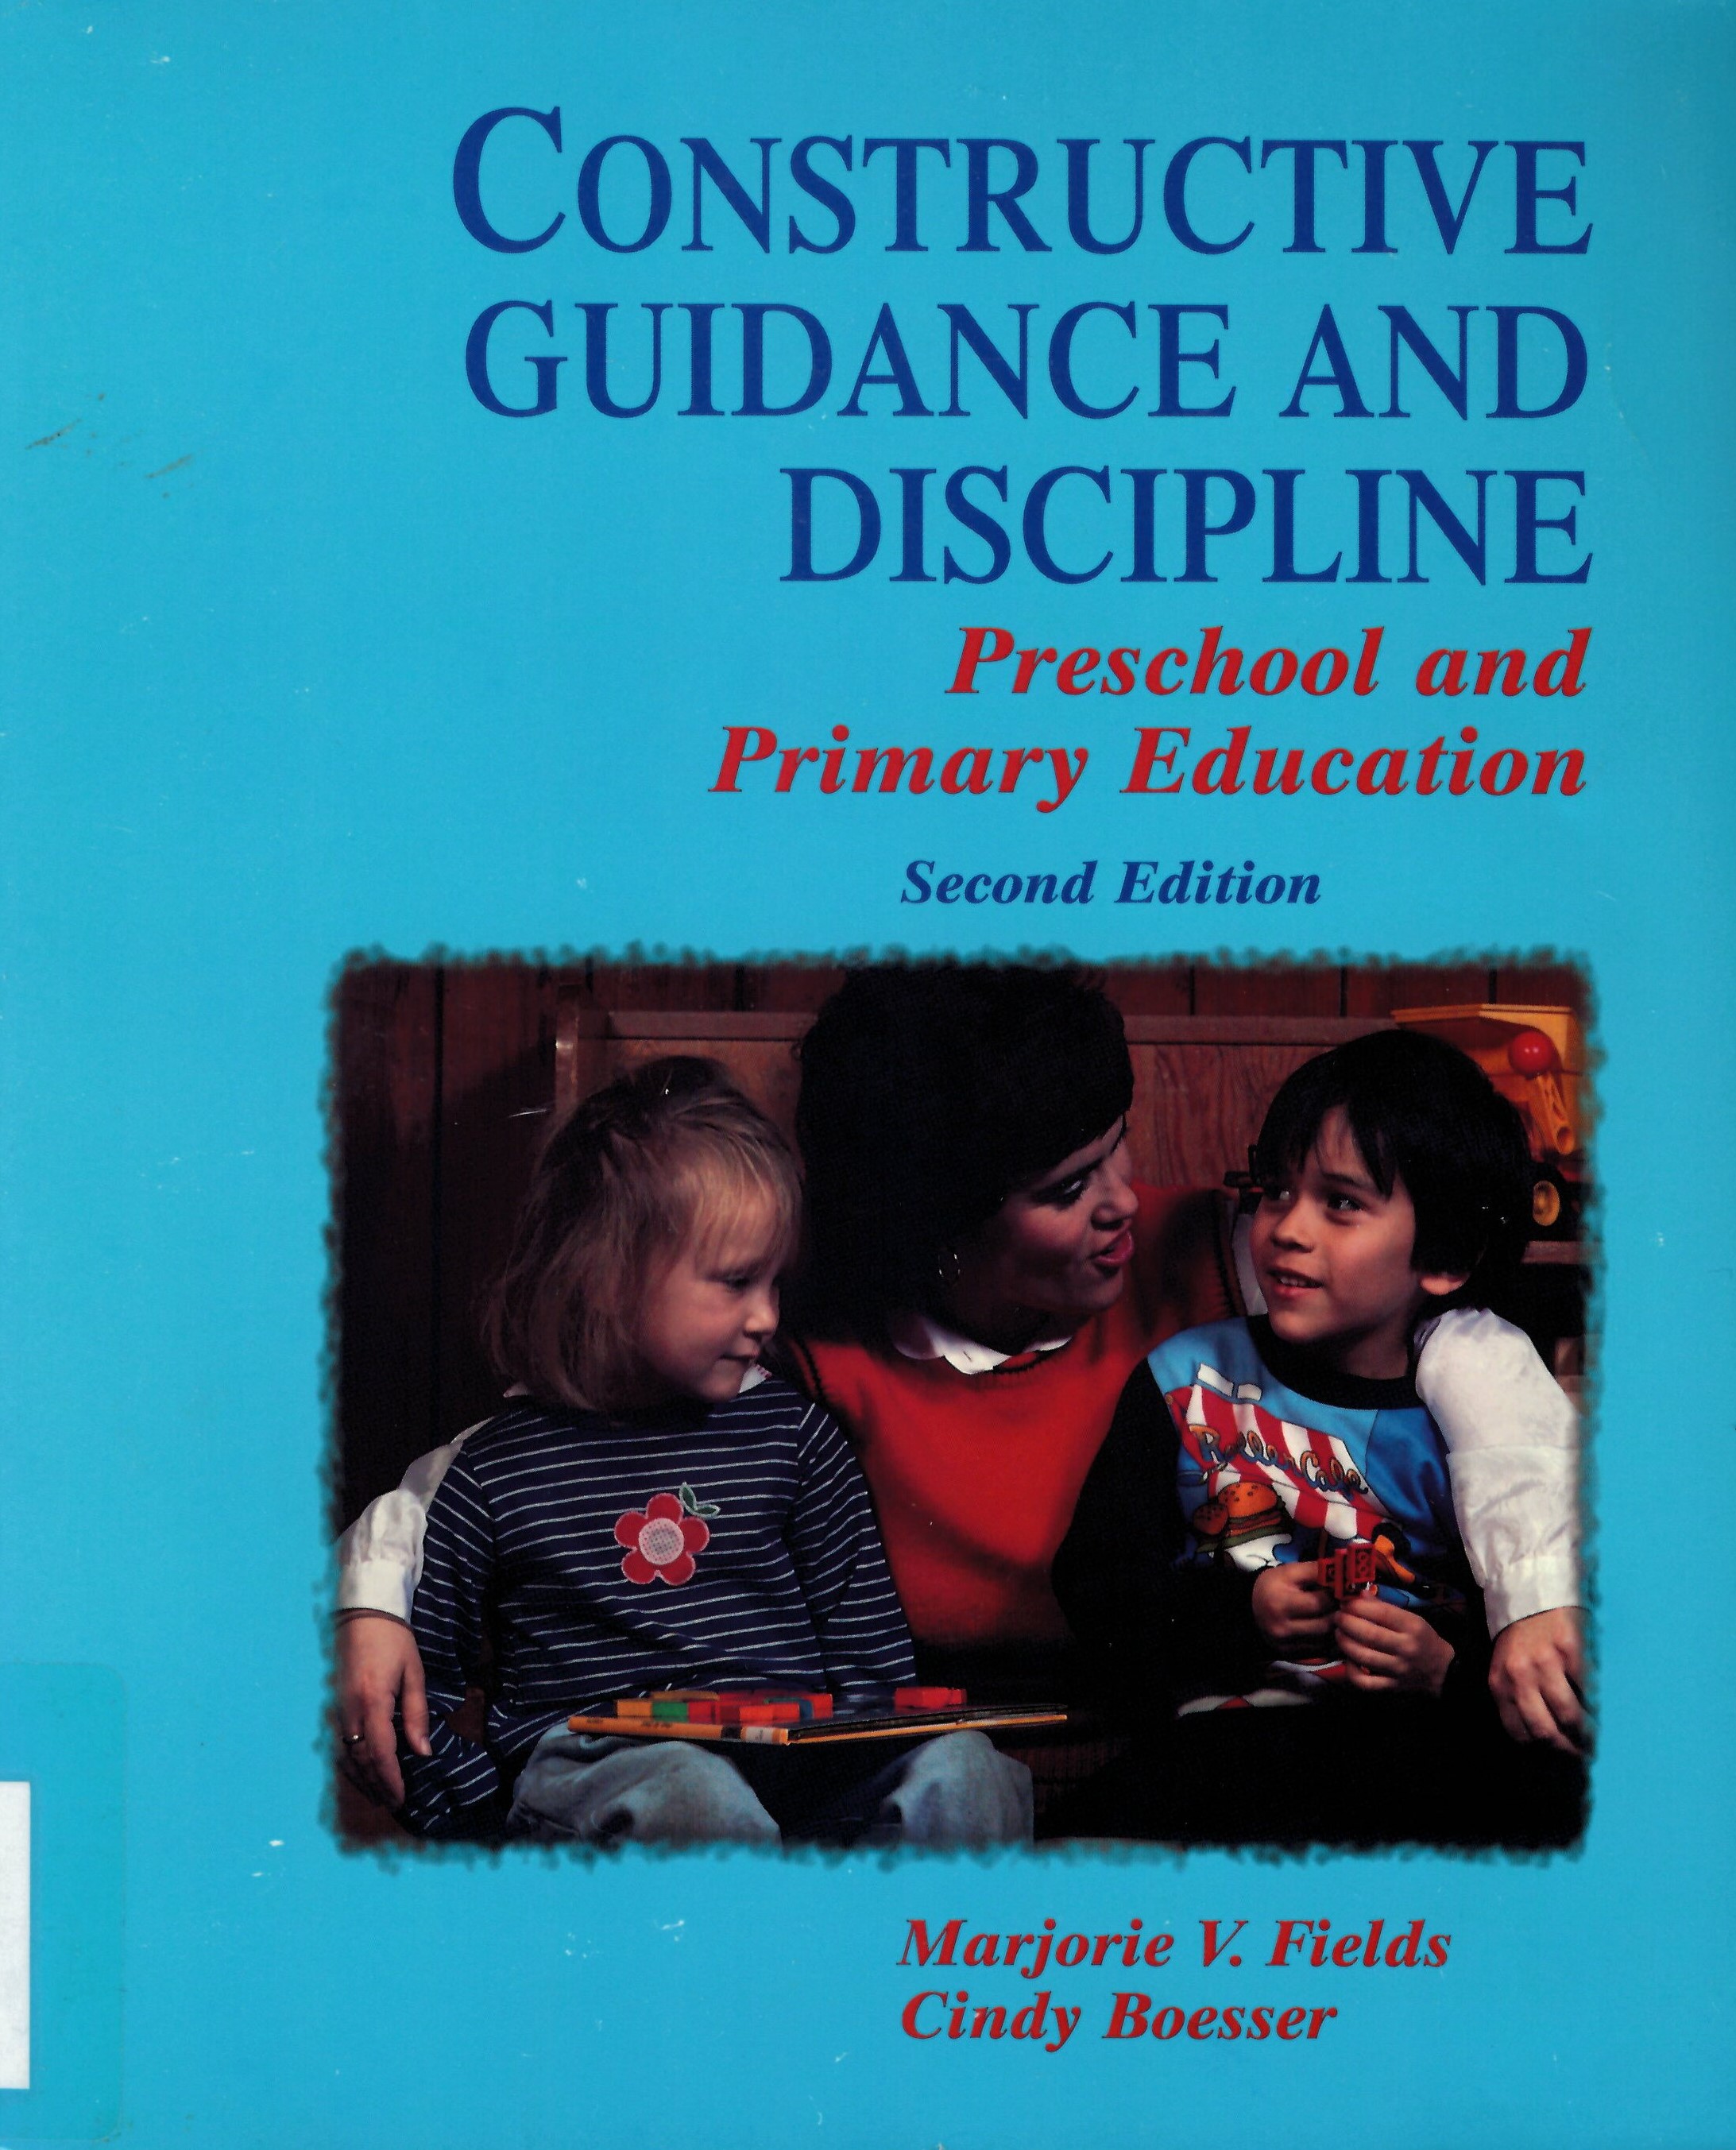 Constructive guidance and discipline : preschool and primary education